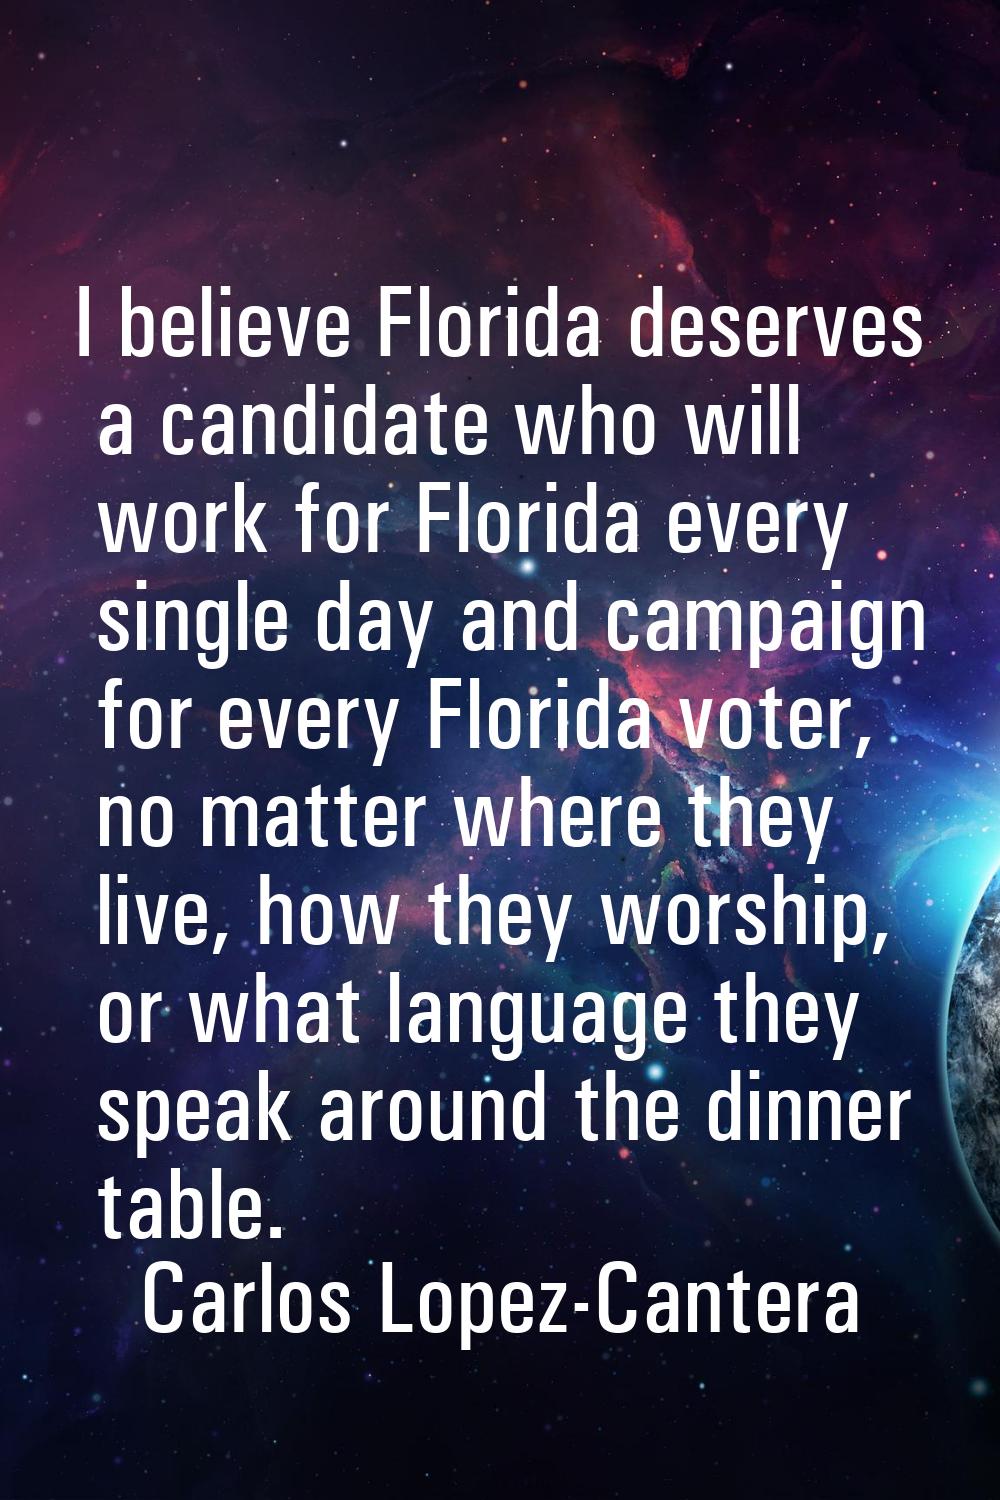 I believe Florida deserves a candidate who will work for Florida every single day and campaign for 